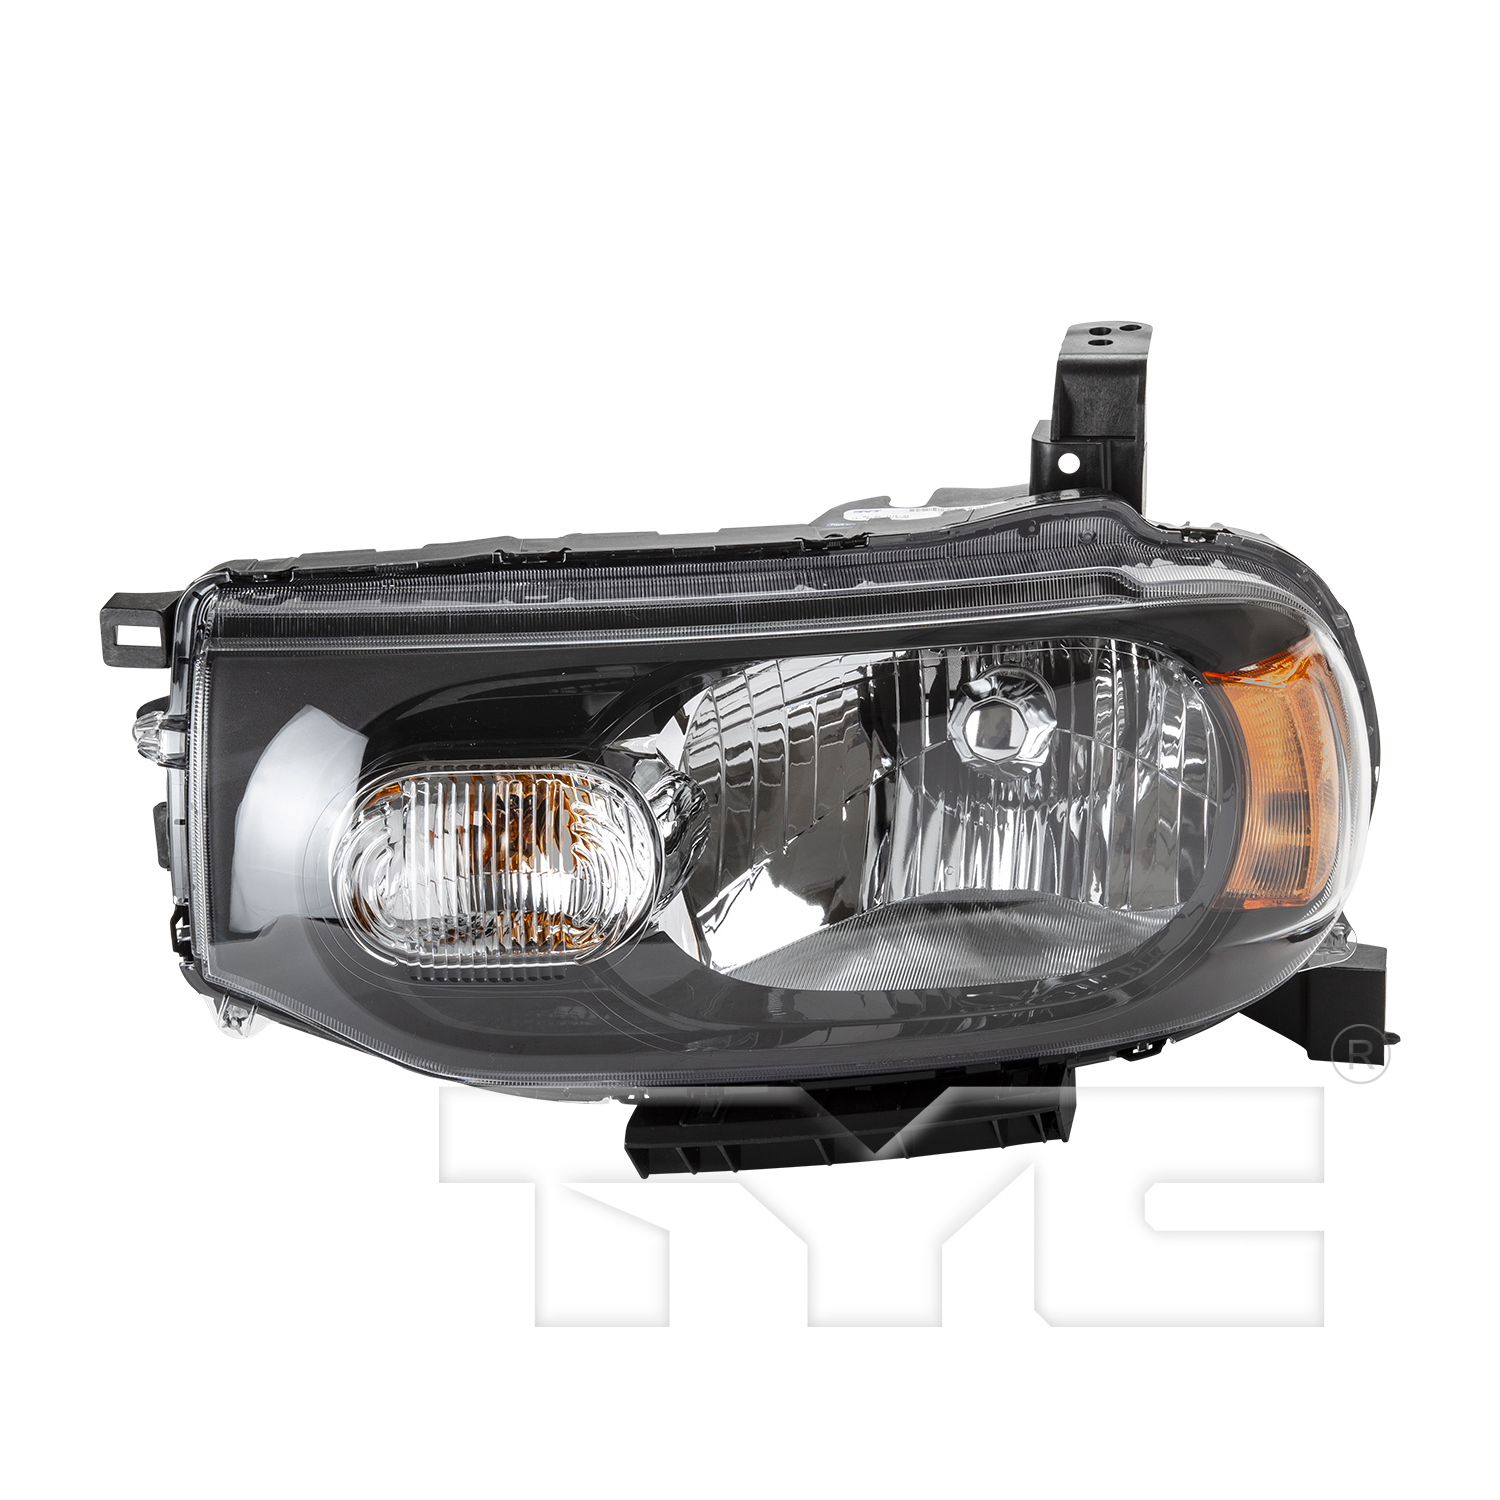 Aftermarket HEADLIGHTS for NISSAN - CUBE, CUBE,09-14,LT Headlamp assy composite